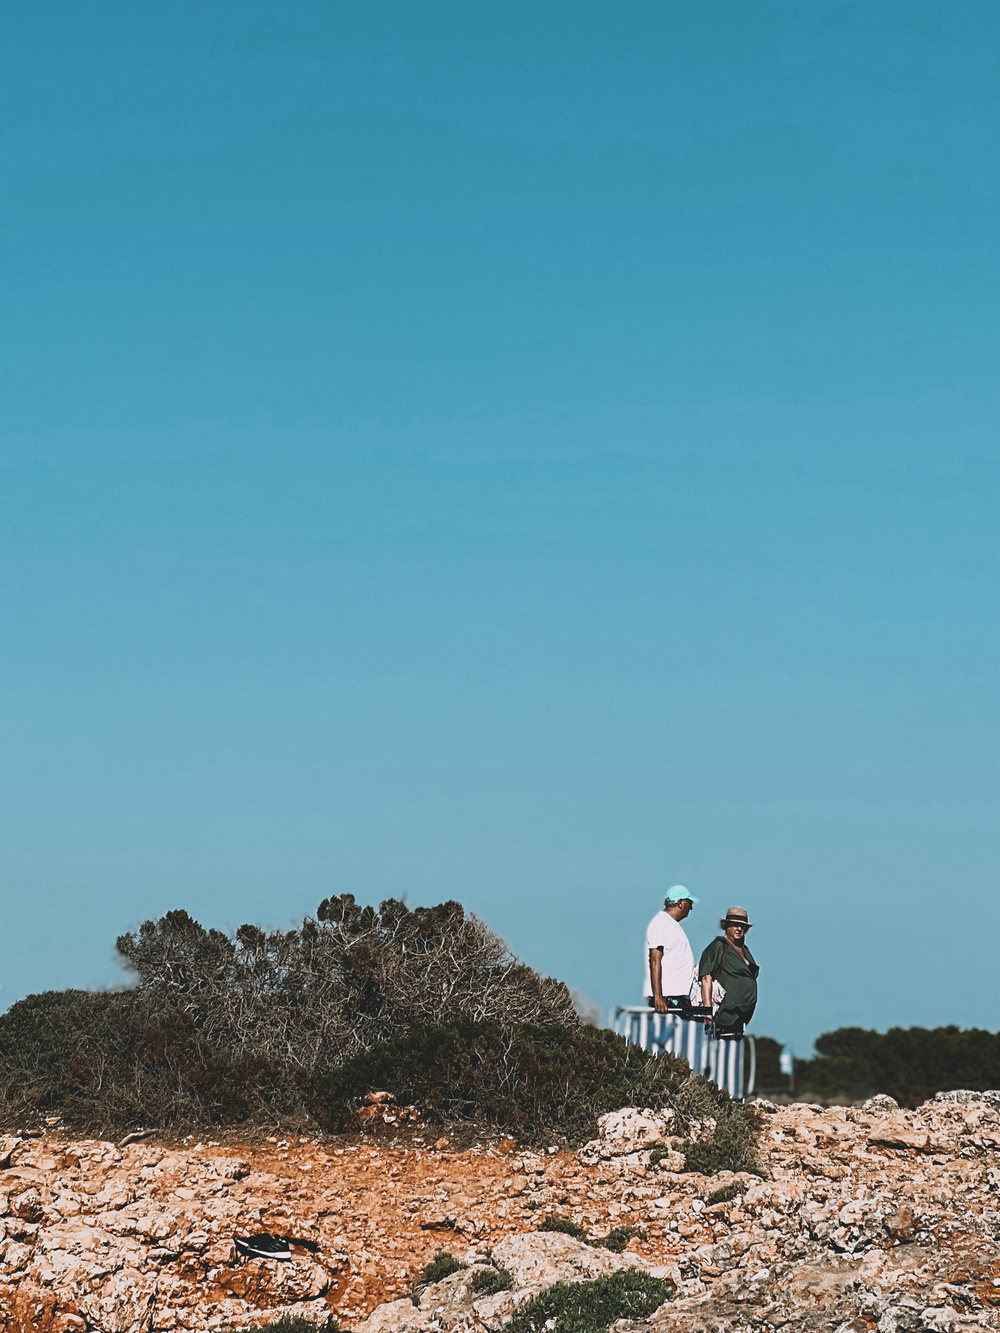 A couple stands on a rocky and arid landscape with some shrubs, under a clear blue sky. They are wearing casual clothing and hats and are looking towards the horizon.